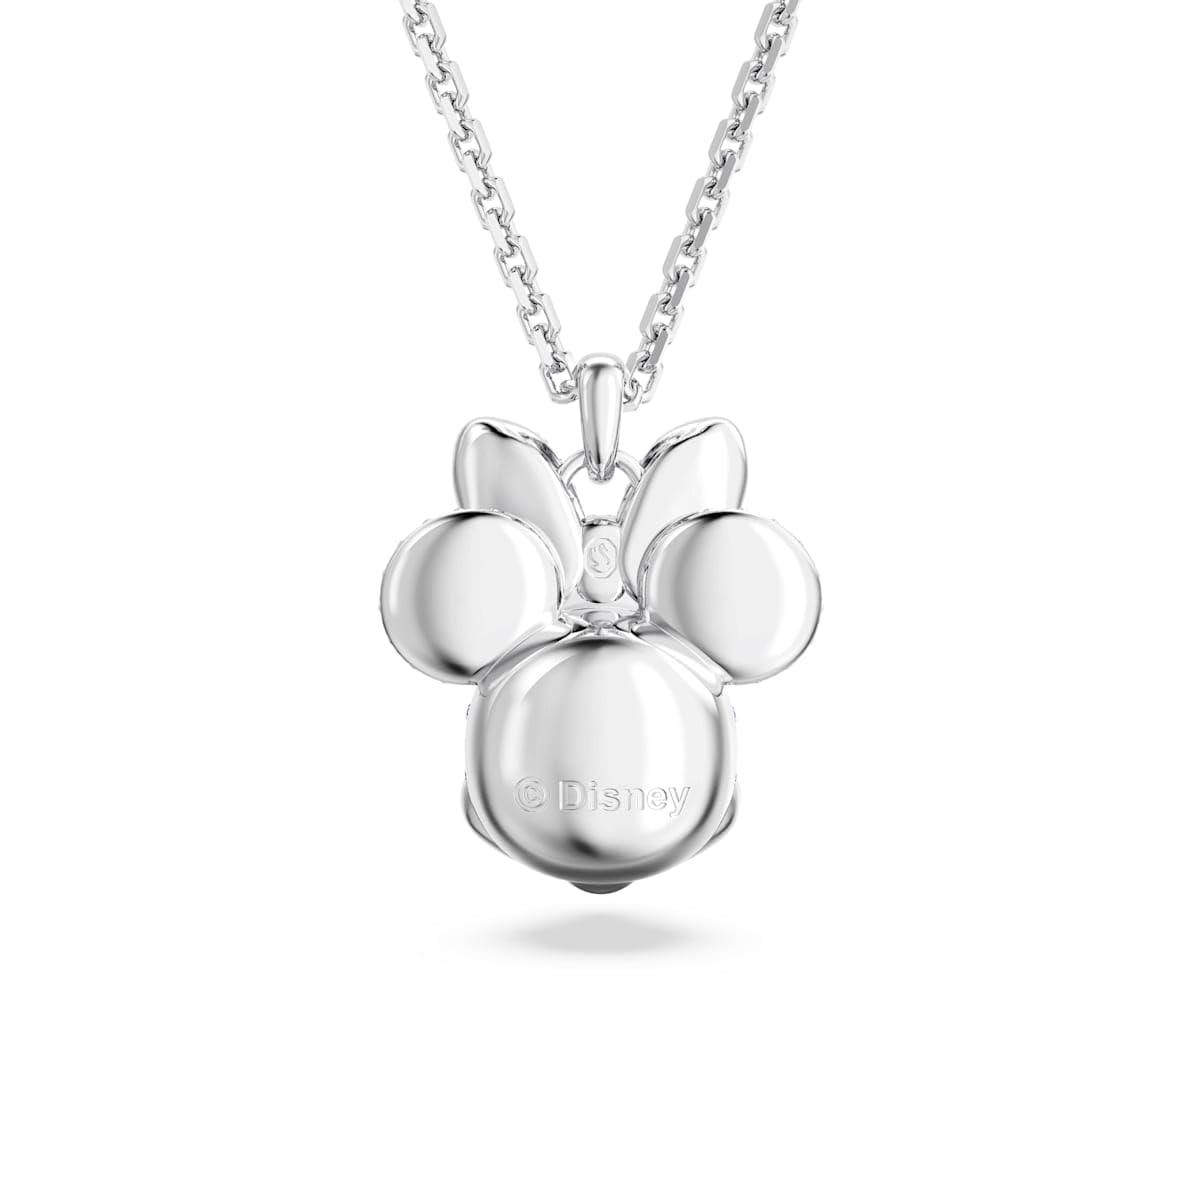 Swarovski Disney100 Pendant Necklace, Minnie Mouse Motif with Clear Pavé Crystals in a Rhodium Finished Setting, Part of the Disney100 Collection